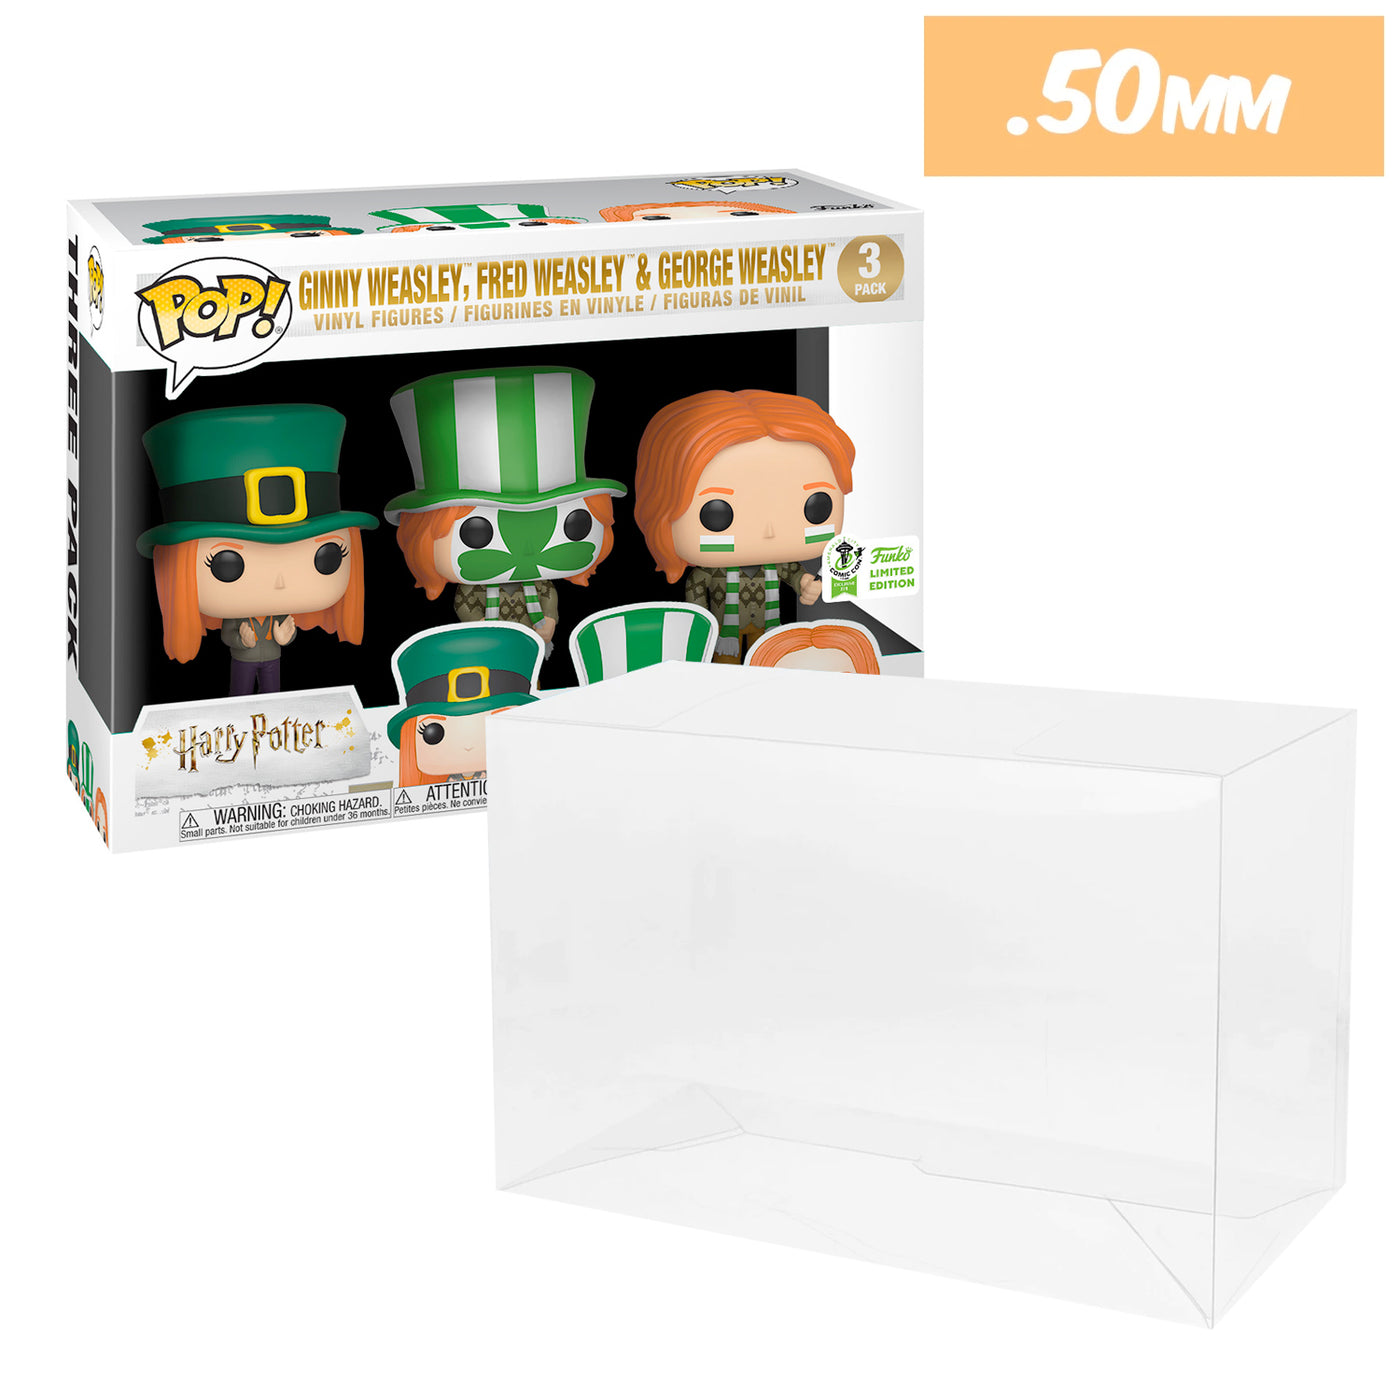 3 PACK QUIDDITCH WORLD CUP Pop Protectors for Funko (50mm thick) 6.25h x 9.5w x 3.5d